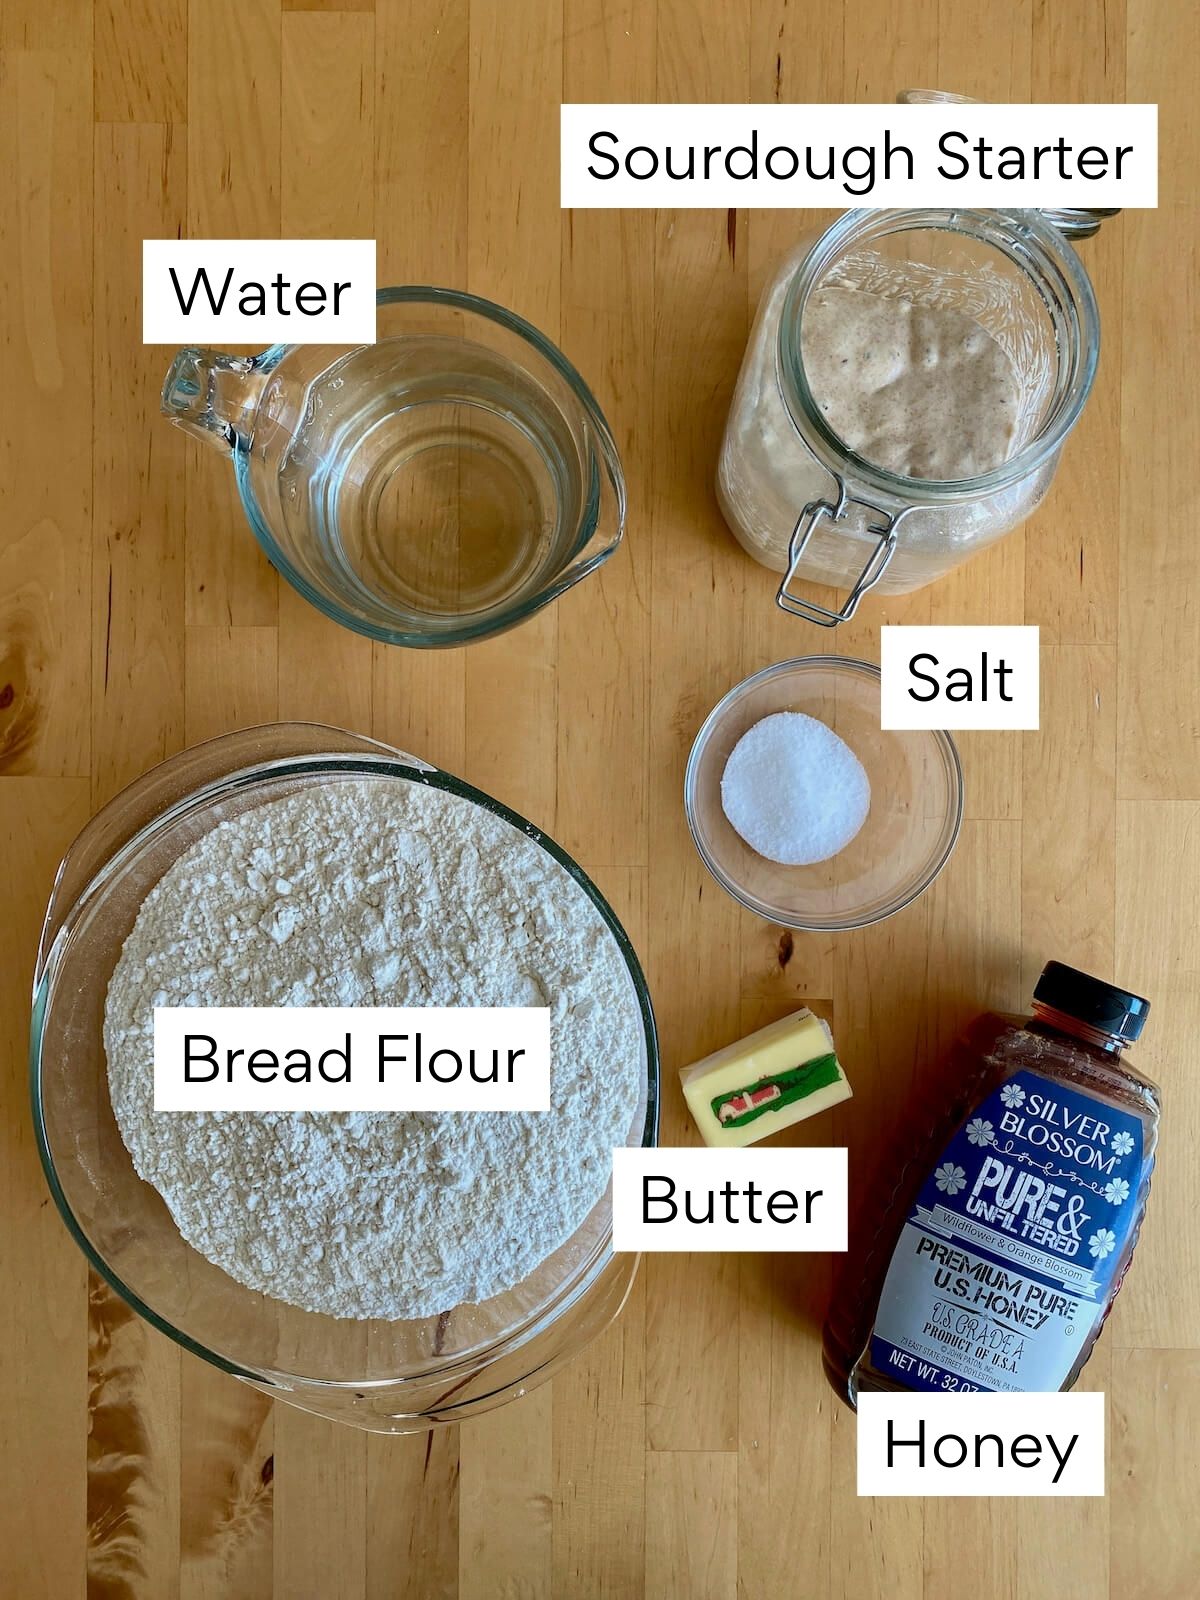 The ingredients to make sourdough hoagie rolls on a butcher block countertop. Each ingredient is labeled with text. They include sourdough starter, water, bread flour, salt, butter, and honey.